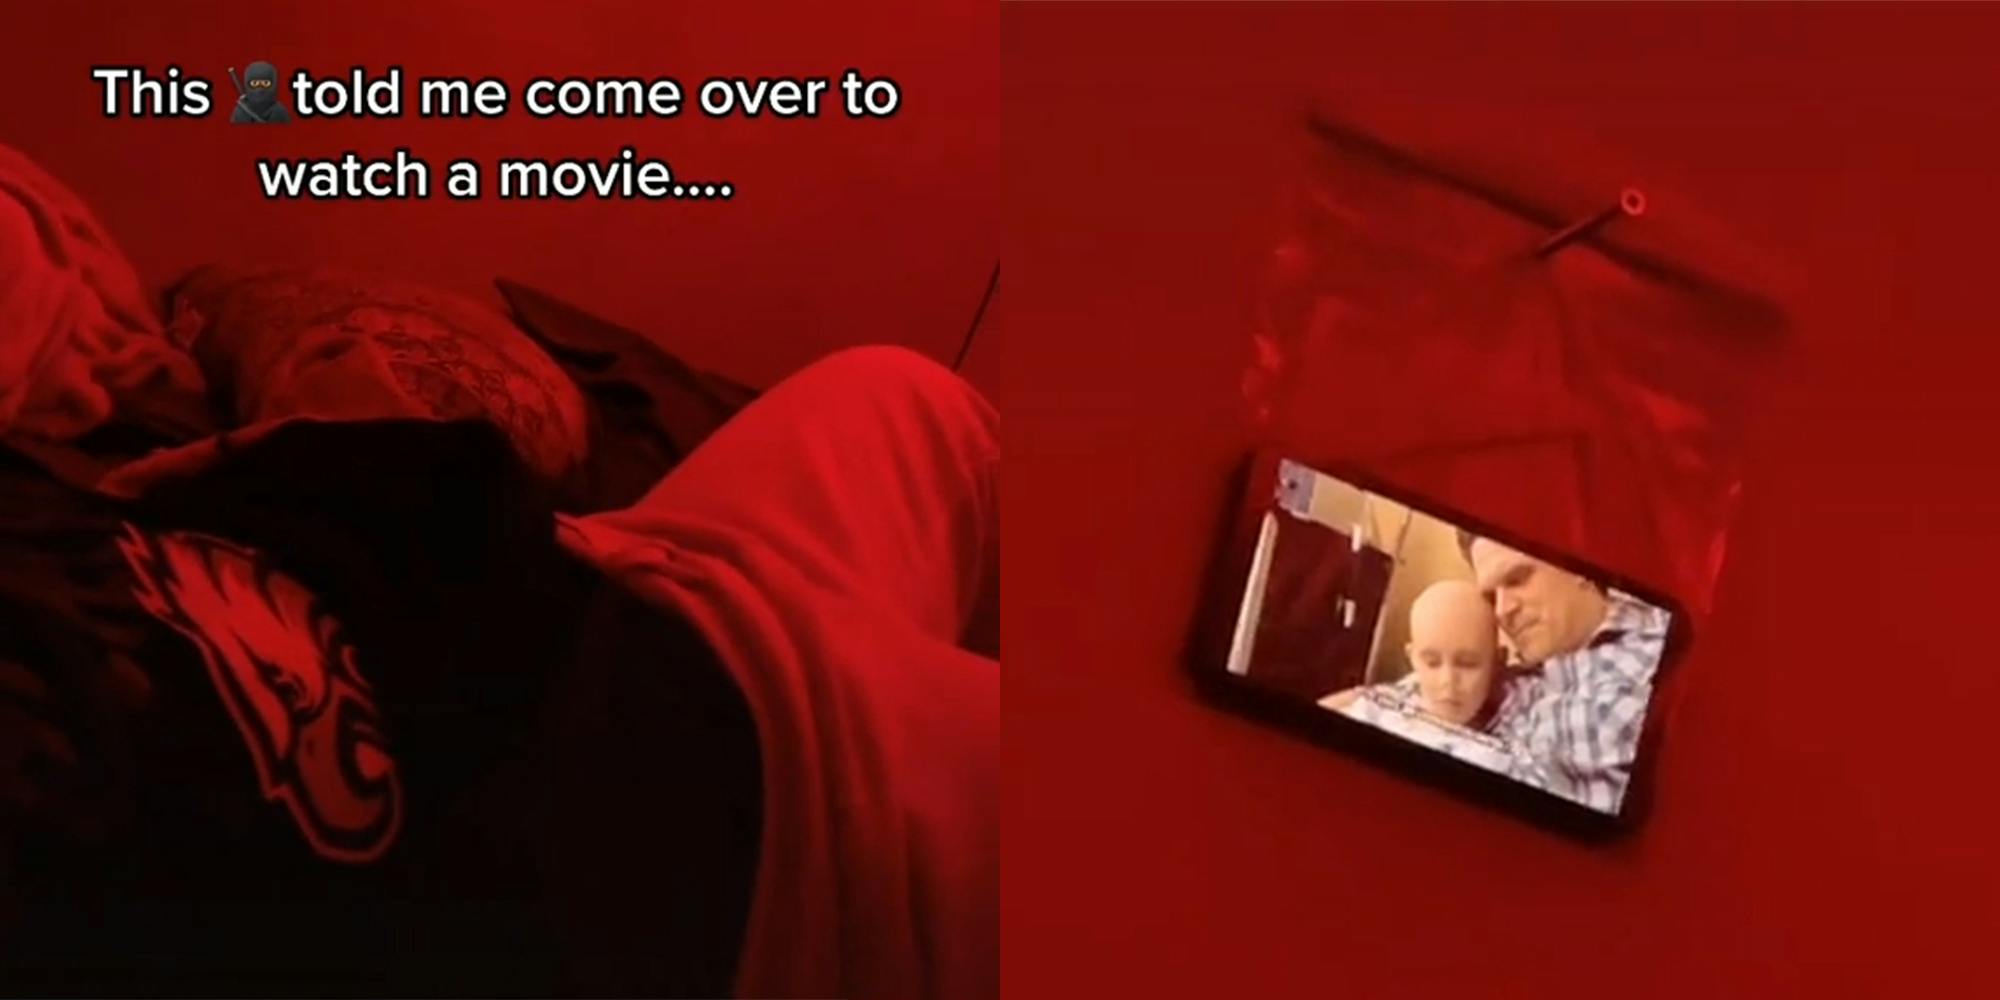 man on bed with Eagles logo and caption "this ninja told me to come over to watch a movie..." (l) movie playing on phone inside plastic bag screwed to wall (r)